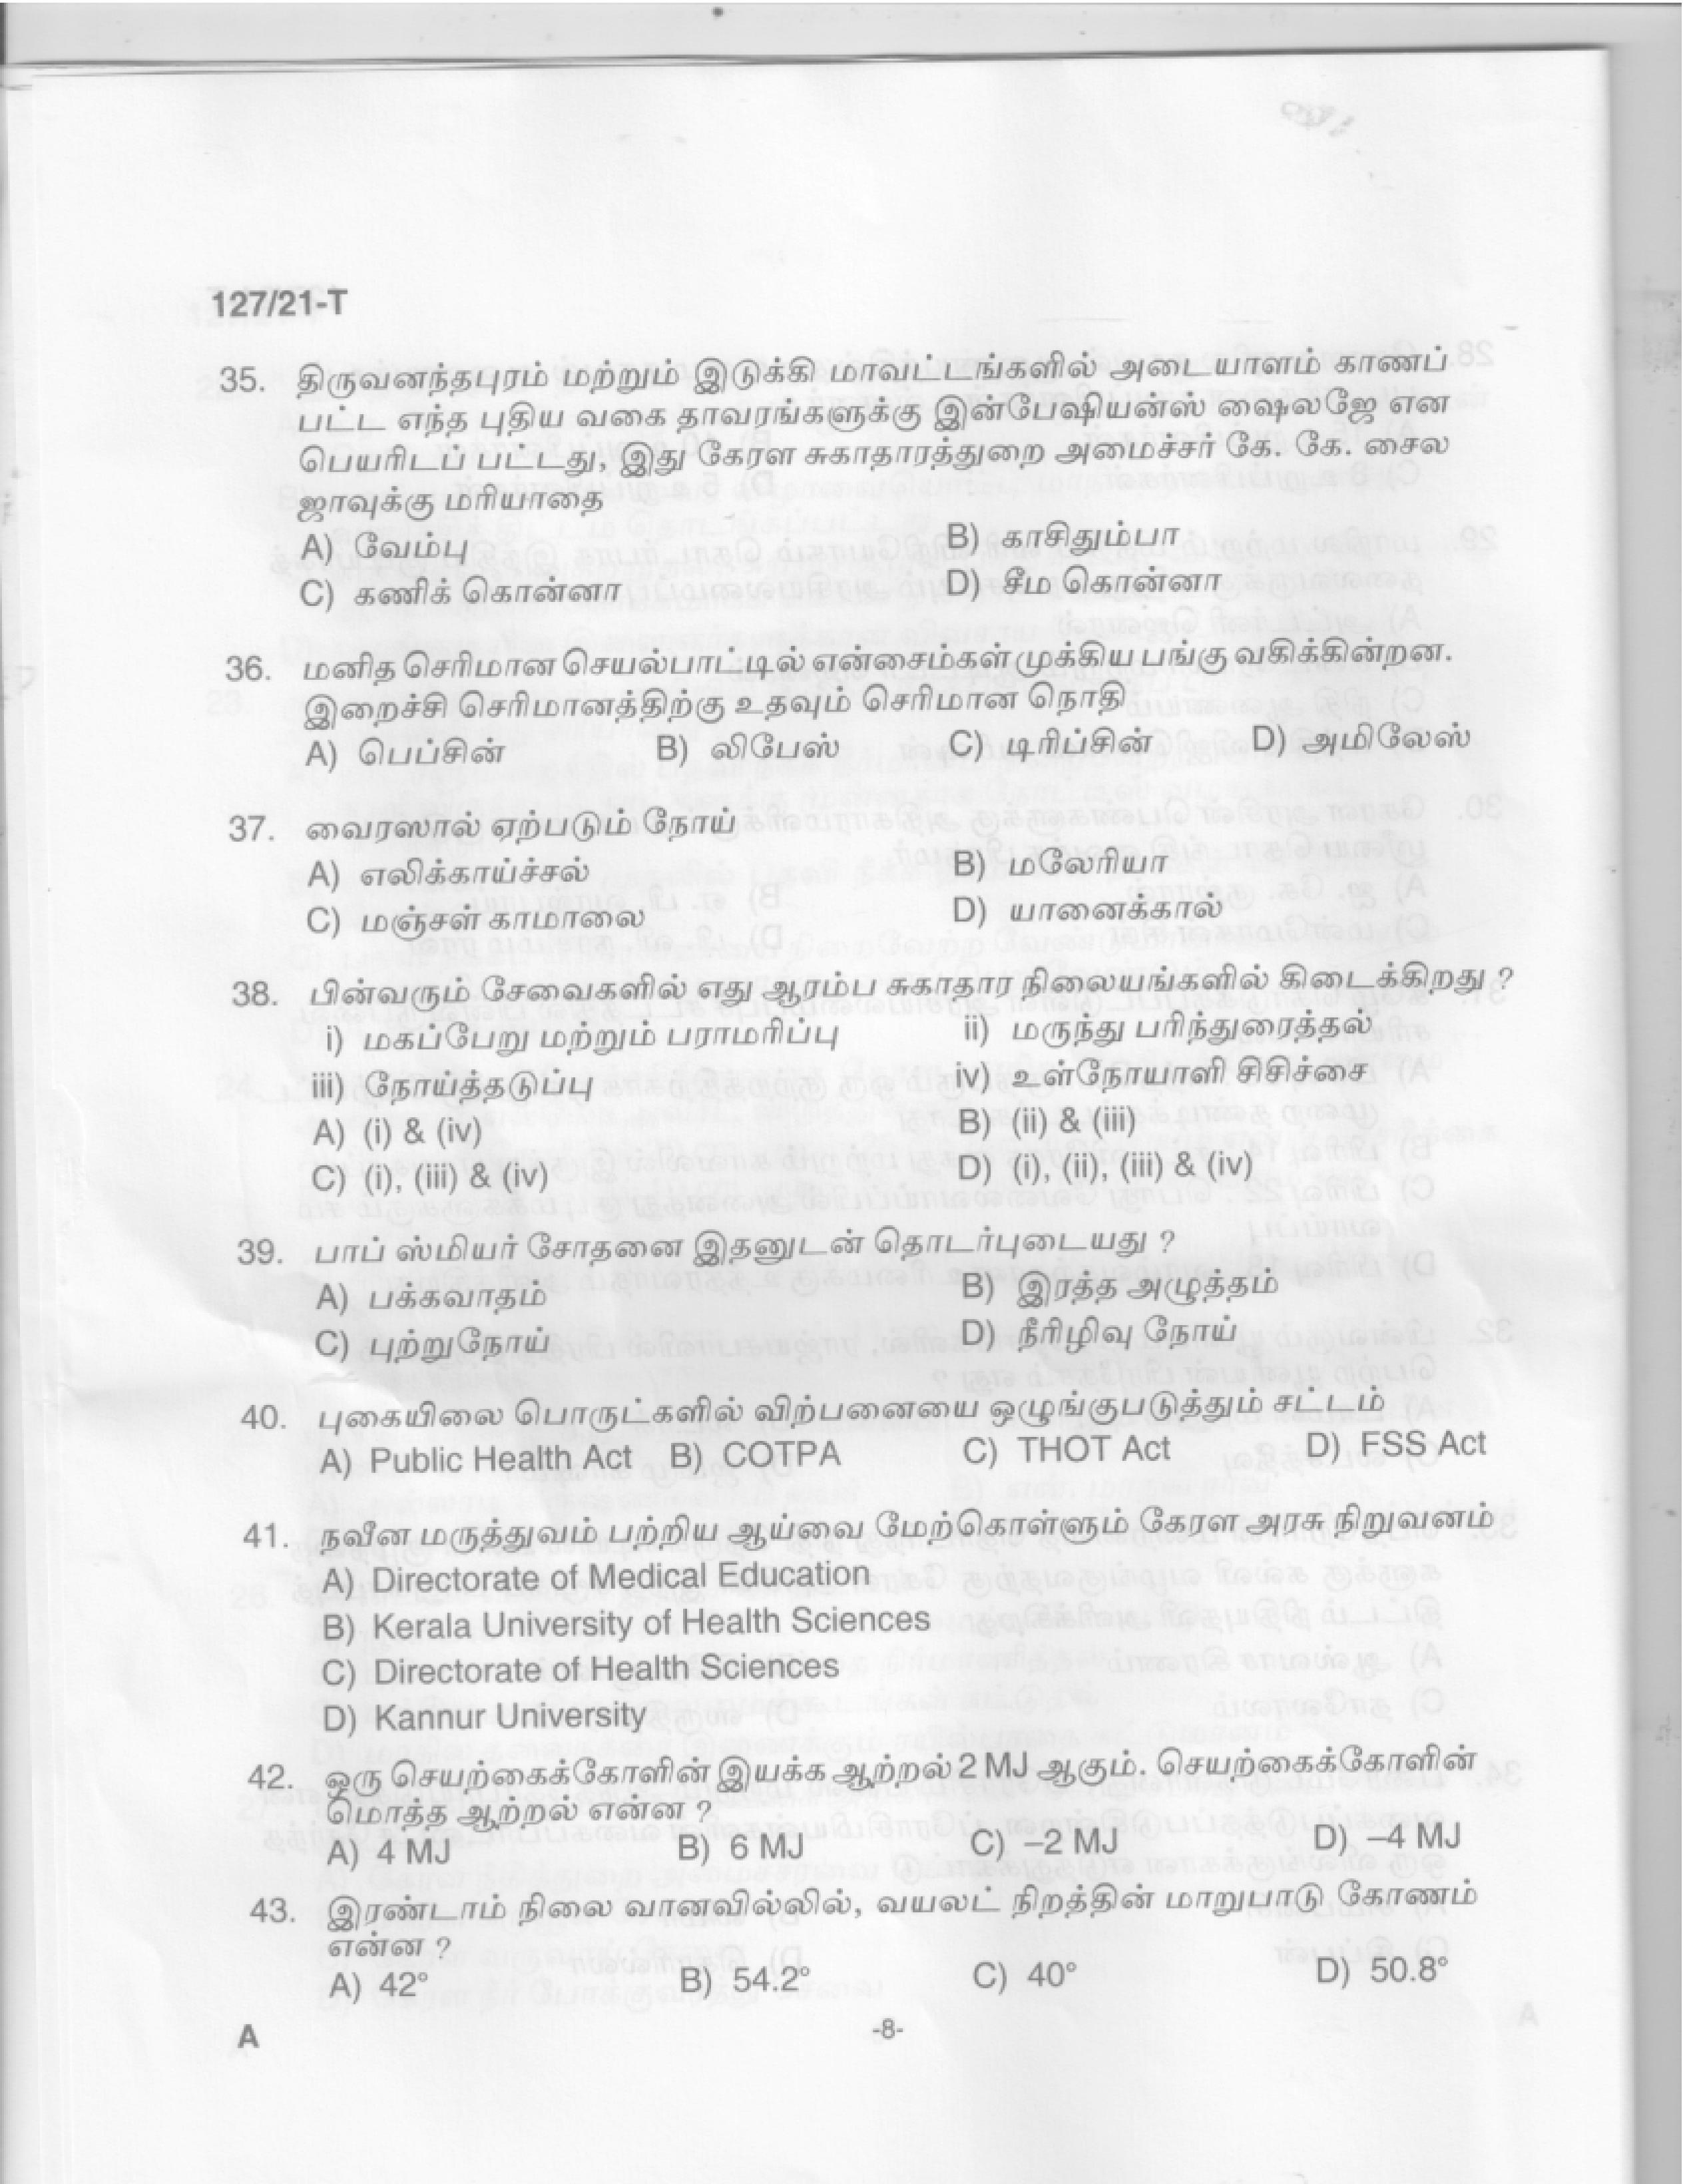 Office Attendant and Laboratory Attender Tamil Exam 2021 Code 1272021 6